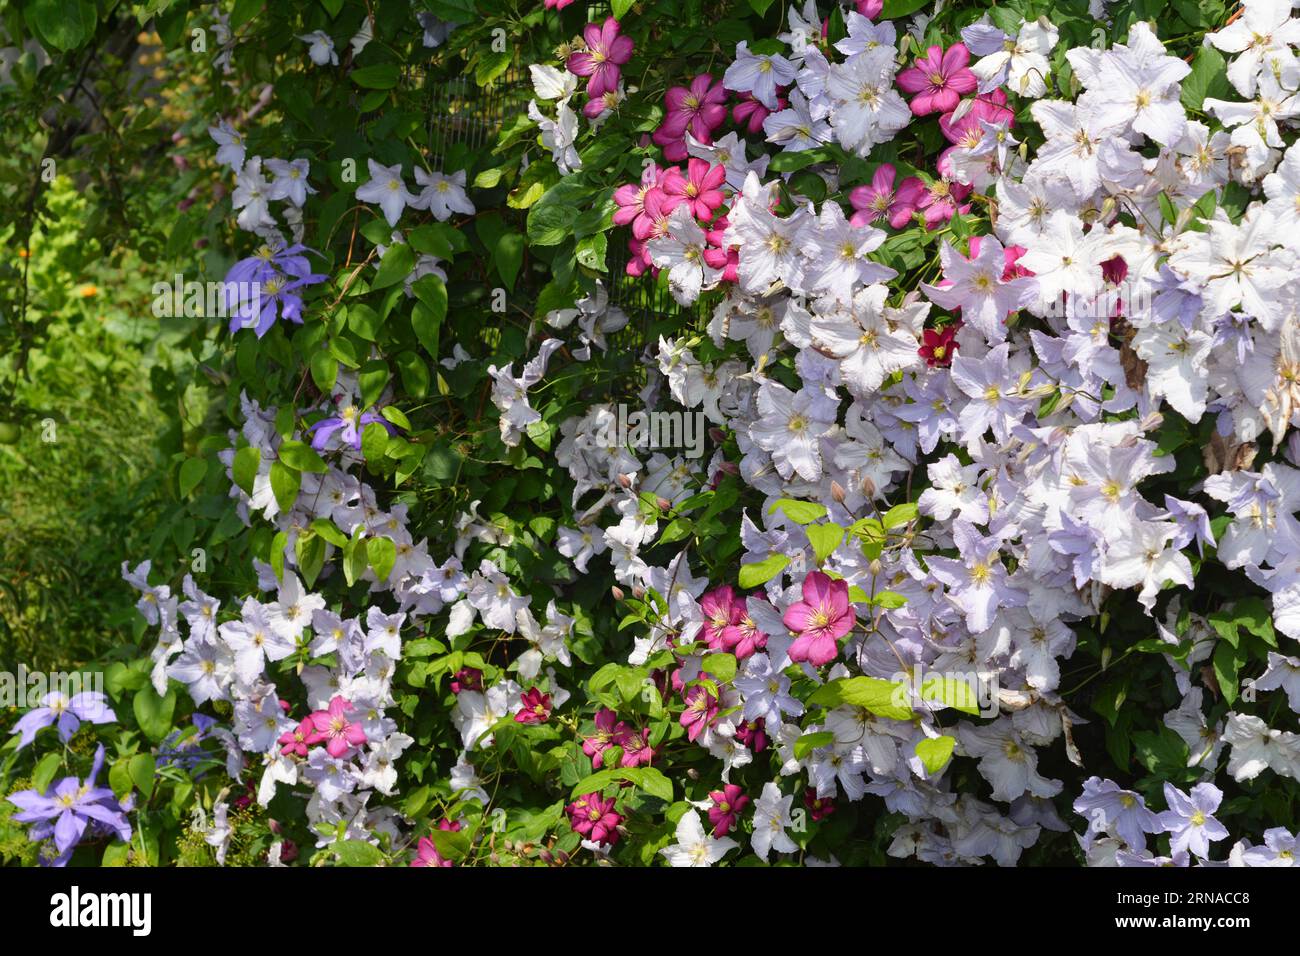 A green fence wall decorated by small-flowered varieties of clematis Comtesse de Bouchaud, Blue Angel, Ville de Lyon, Luther Burbank, Hagley Hybrid. Stock Photo